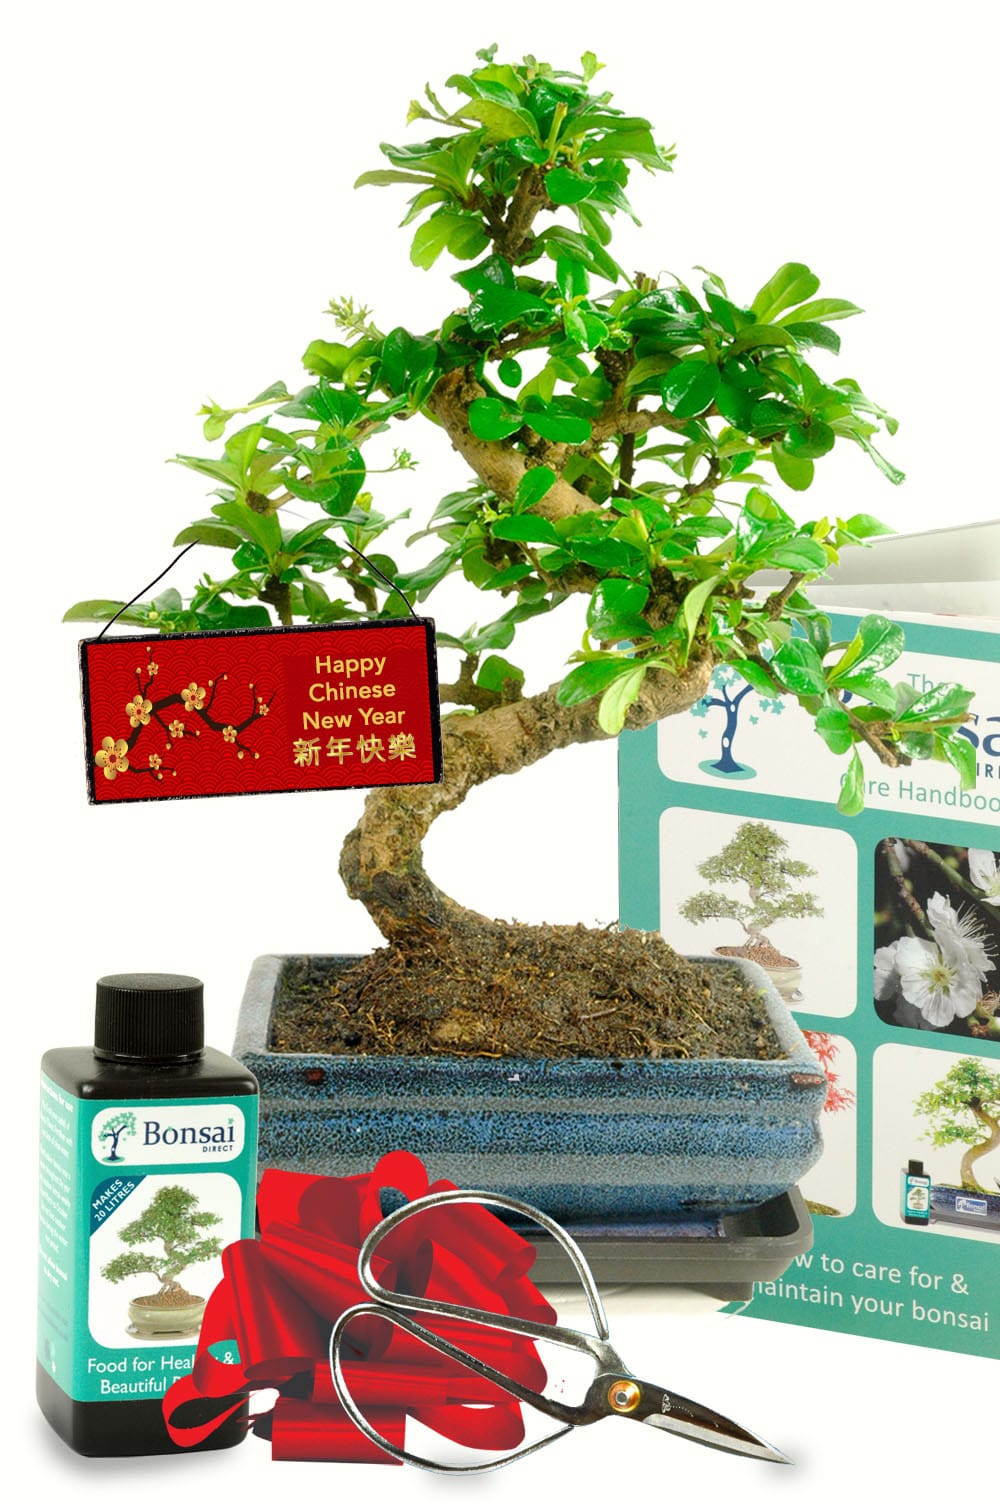 Flowering Twisty Bonsai Tree Offer Chinese New Year GIft